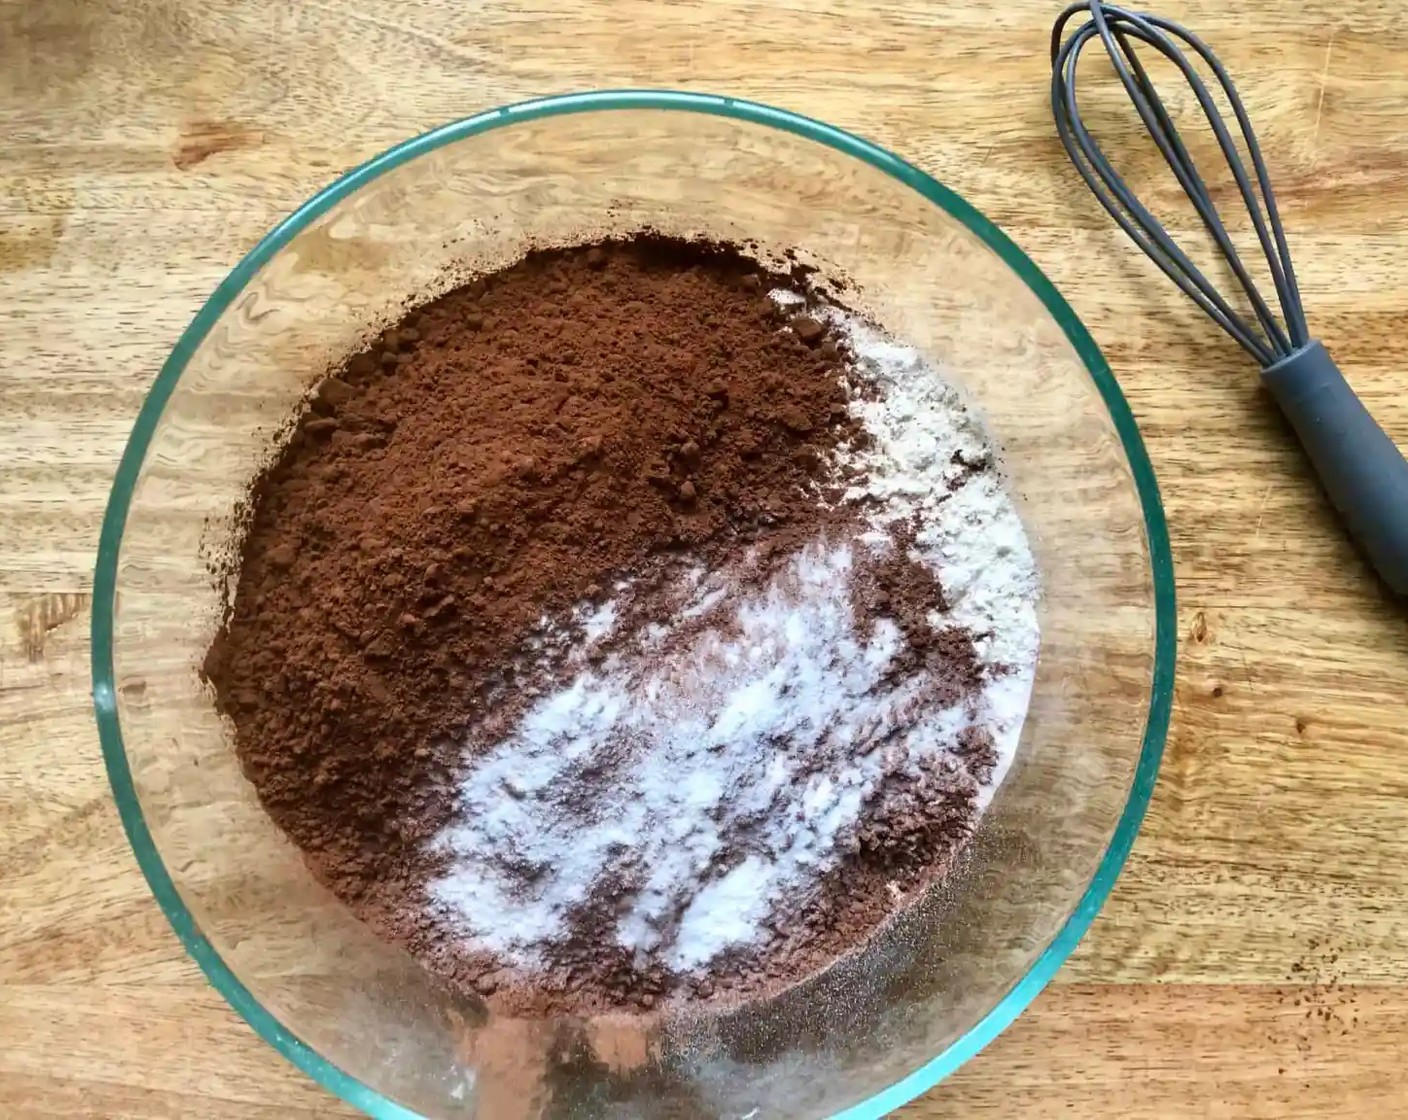 step 3 In a small bowl, combine the Unbleached All Purpose Flour (1 1/2 cups), Unsweetened Cocoa Powder (3/4 cup), Salt (1/2 tsp), and Baking Soda (3/4 tsp). Set aside.